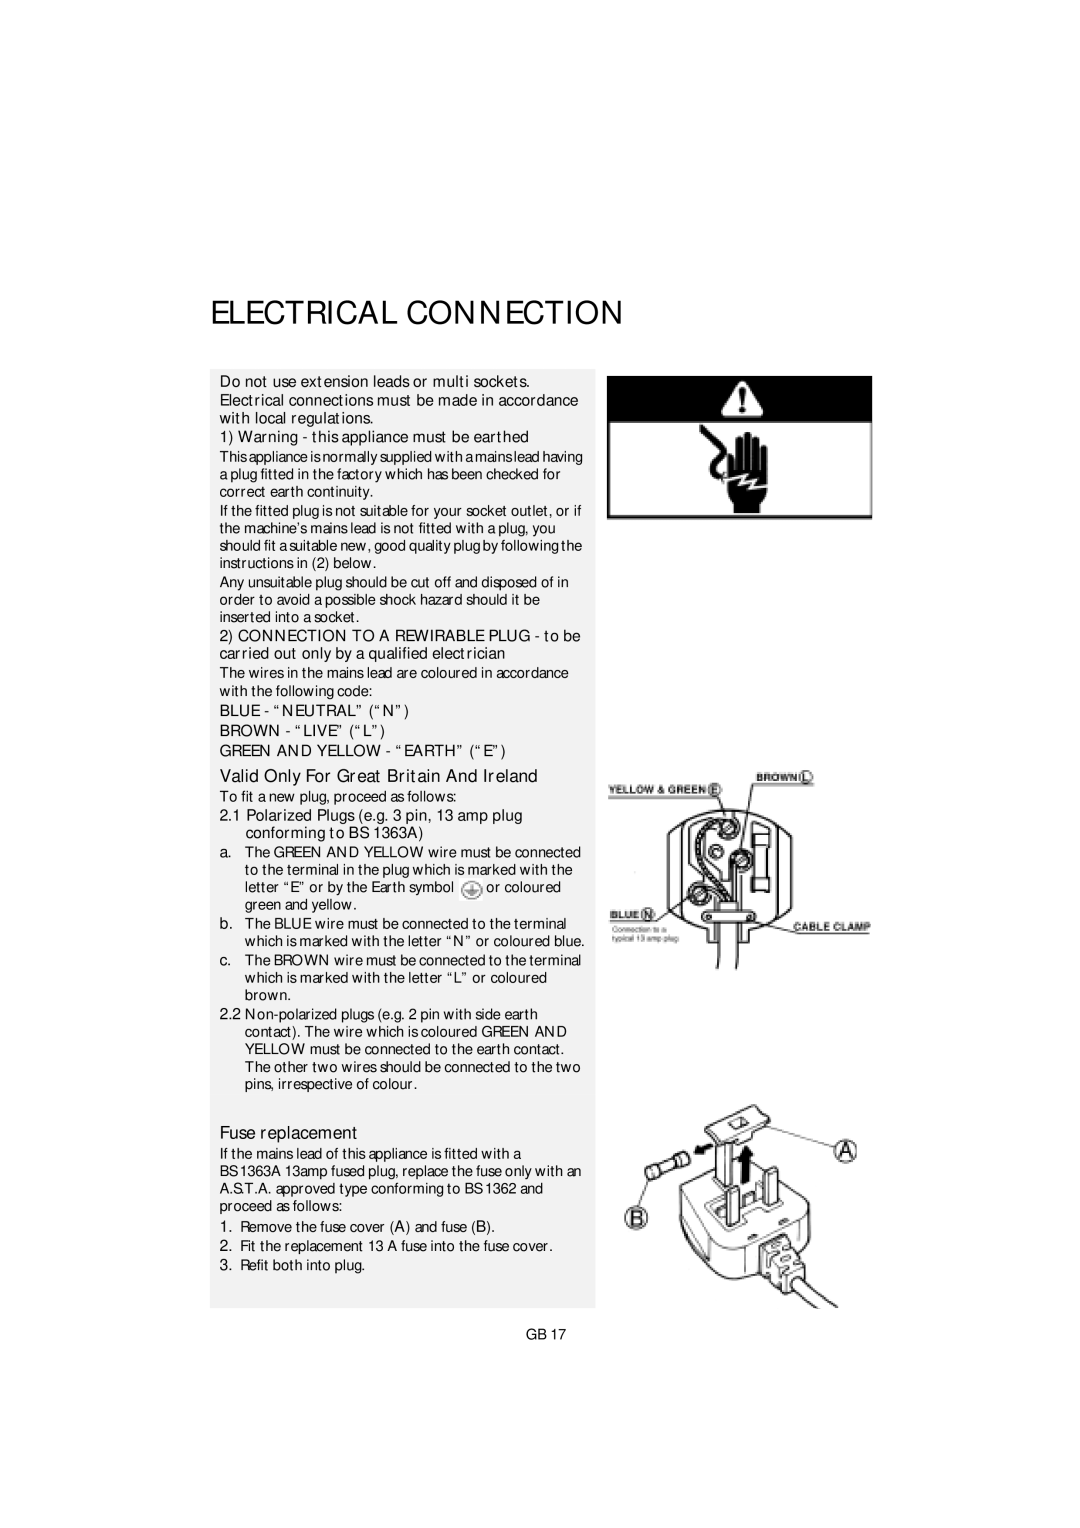 Smeg GB ST L80 manual Electrical Connection, Valid Only For Great Britain And Ireland, Fuse replacement 